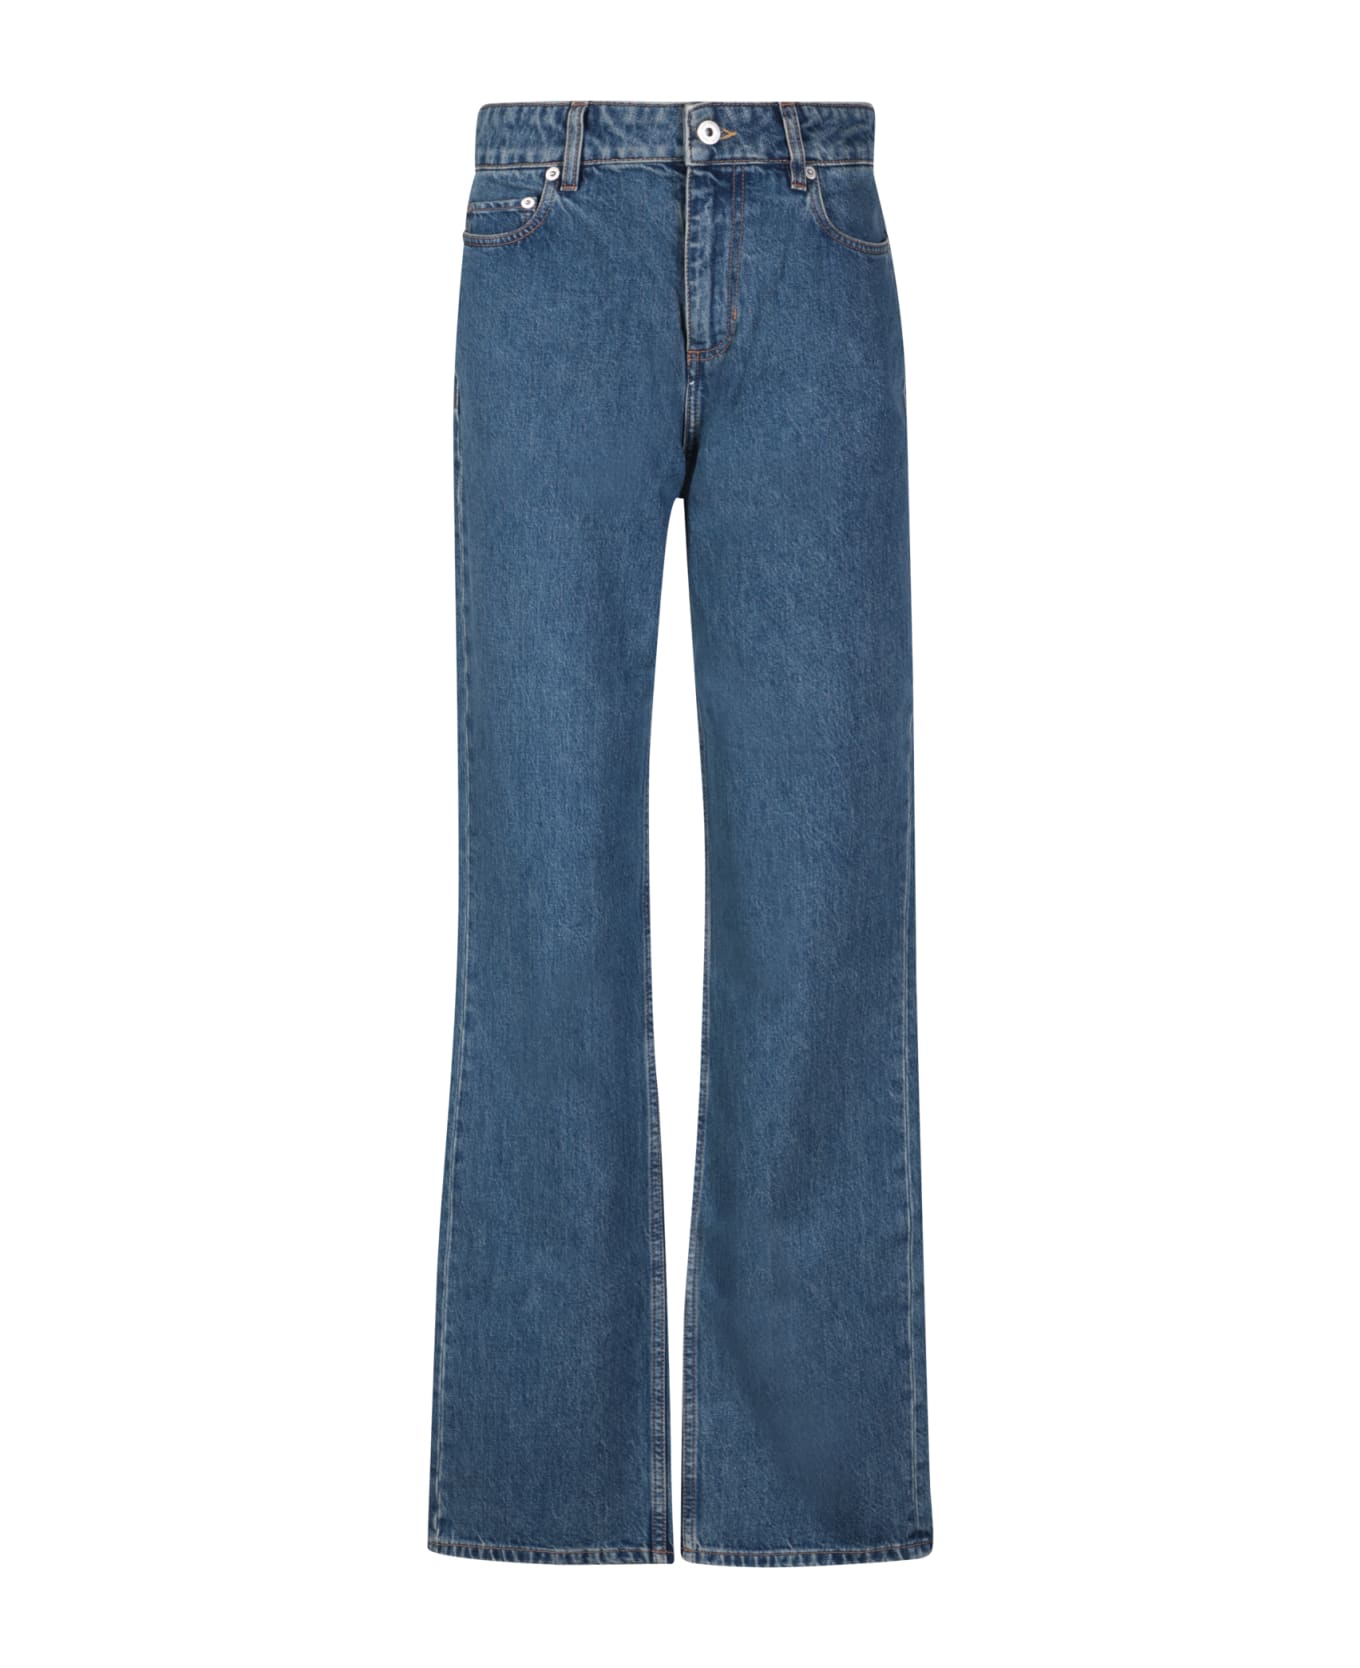 Burberry Straight Cut Jeans - Classic blue